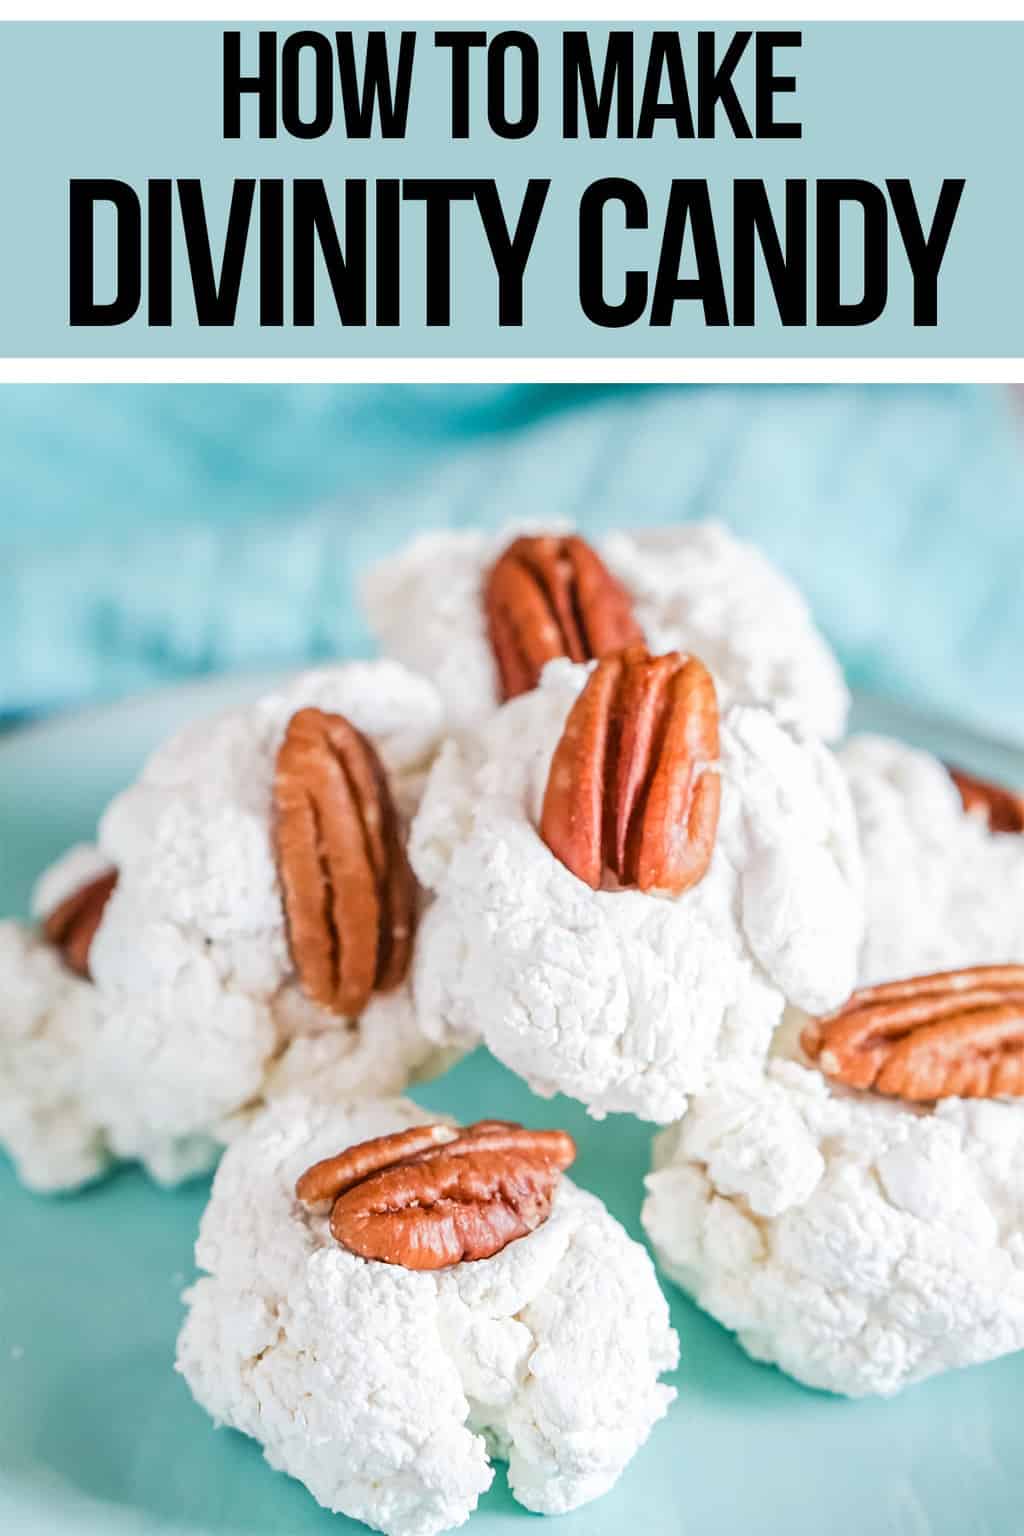 homemade divinity candy recipe with text which reads how to make divinity candy